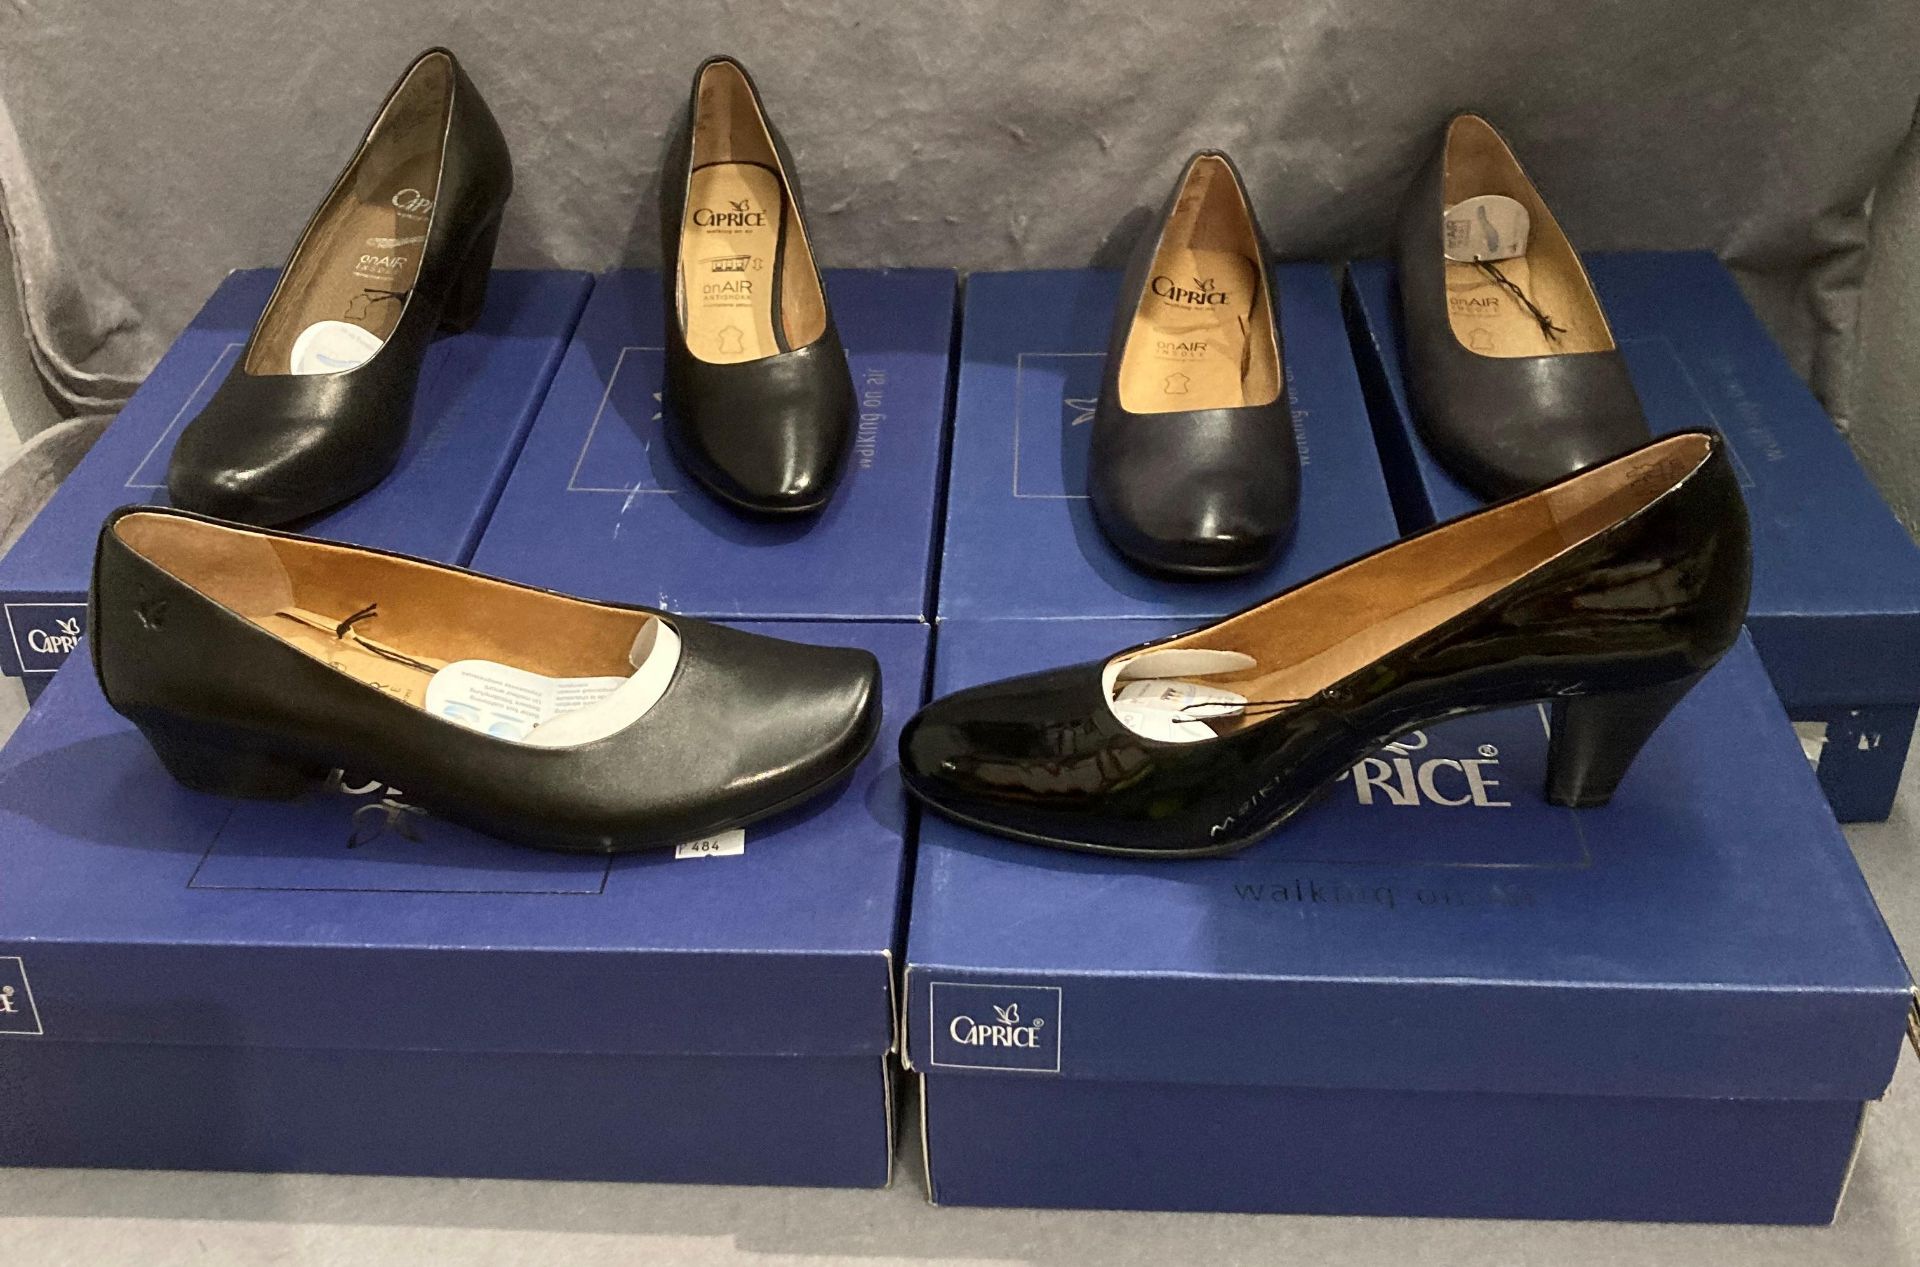 Five assorted pairs of ladies Caprice shoes - sizes 2 x 3.5, 2 x 4, 1 x 6 and 1 x 6.